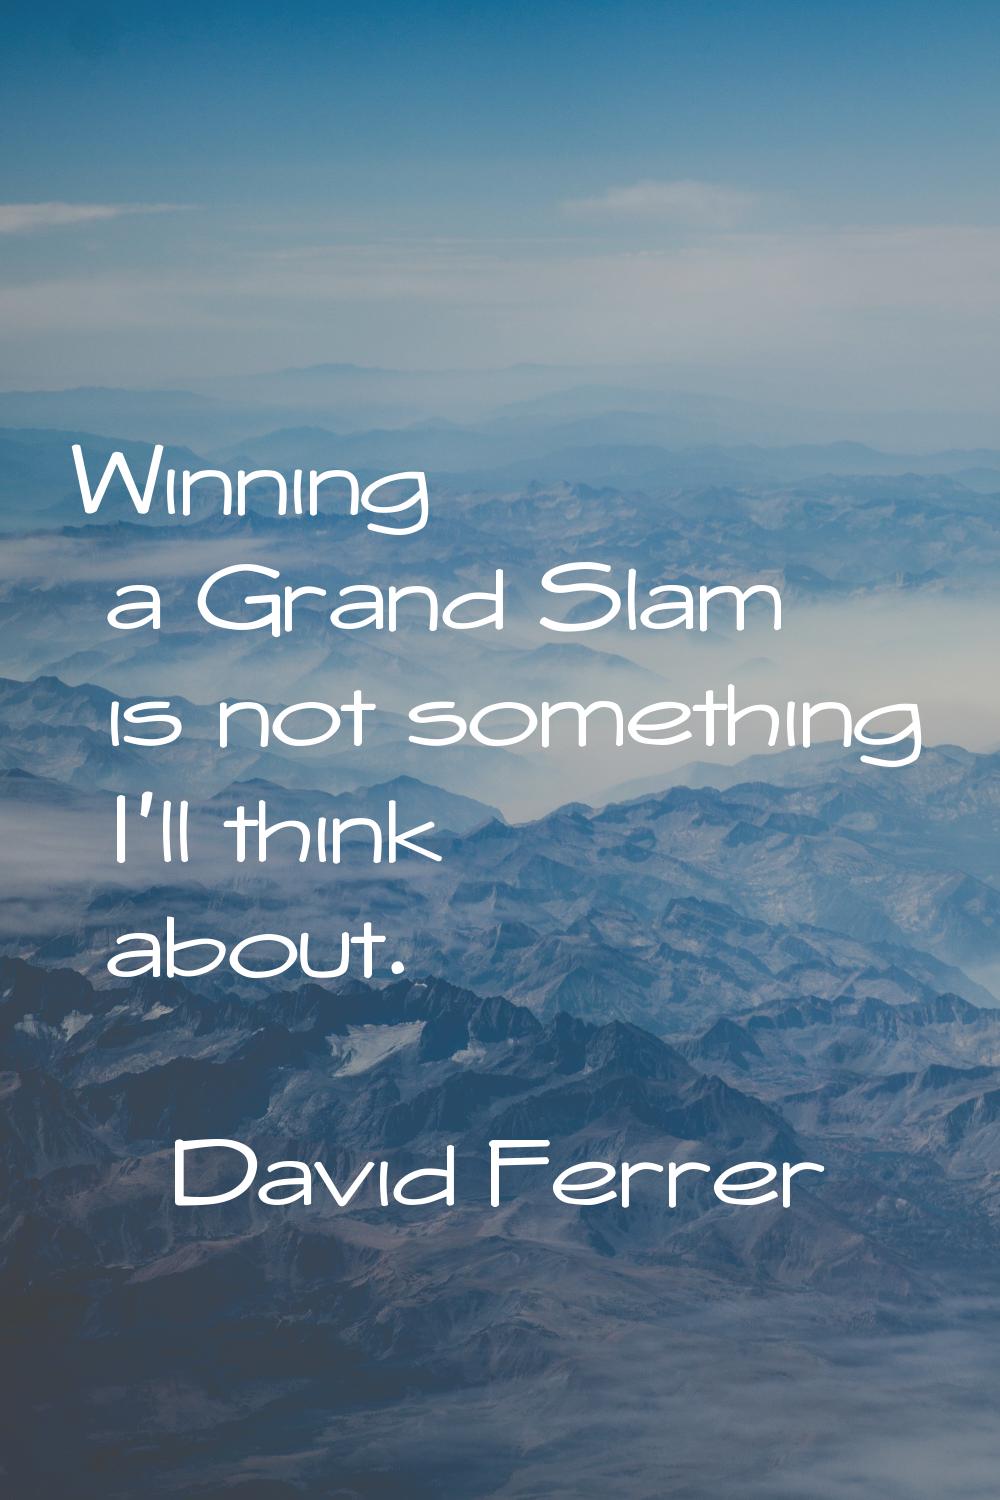 Winning a Grand Slam is not something I'll think about.